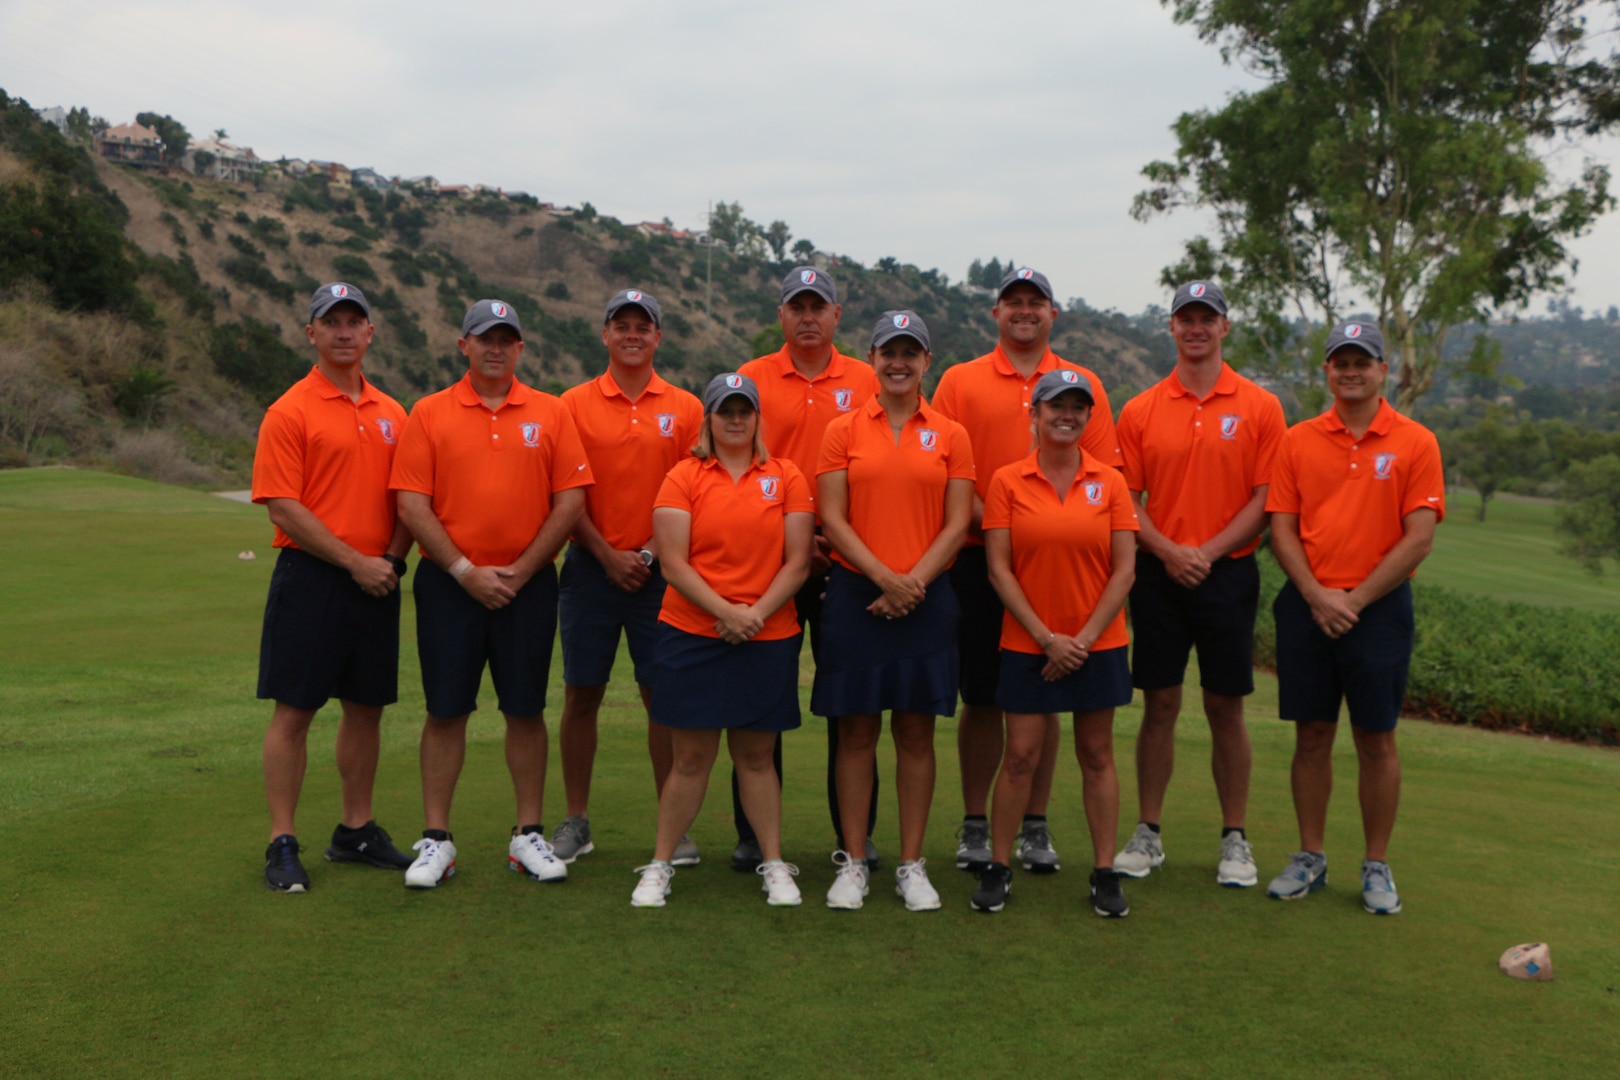 The first stand alone U.S. Coast Guard team. 2023 marks the 75th anniversary of Armed Forces Golf. This year, Naval Base San Diego hosts the championship at the Admiral Baker Golf Course, featuring teams from the Army, Marine Corps, Navy, and Air Force (with Space Force players); and for the first time as a stand alone team, the U.S. Coast Guard.  Department of Defense Photo by Mr. Steven Dinote - Released.